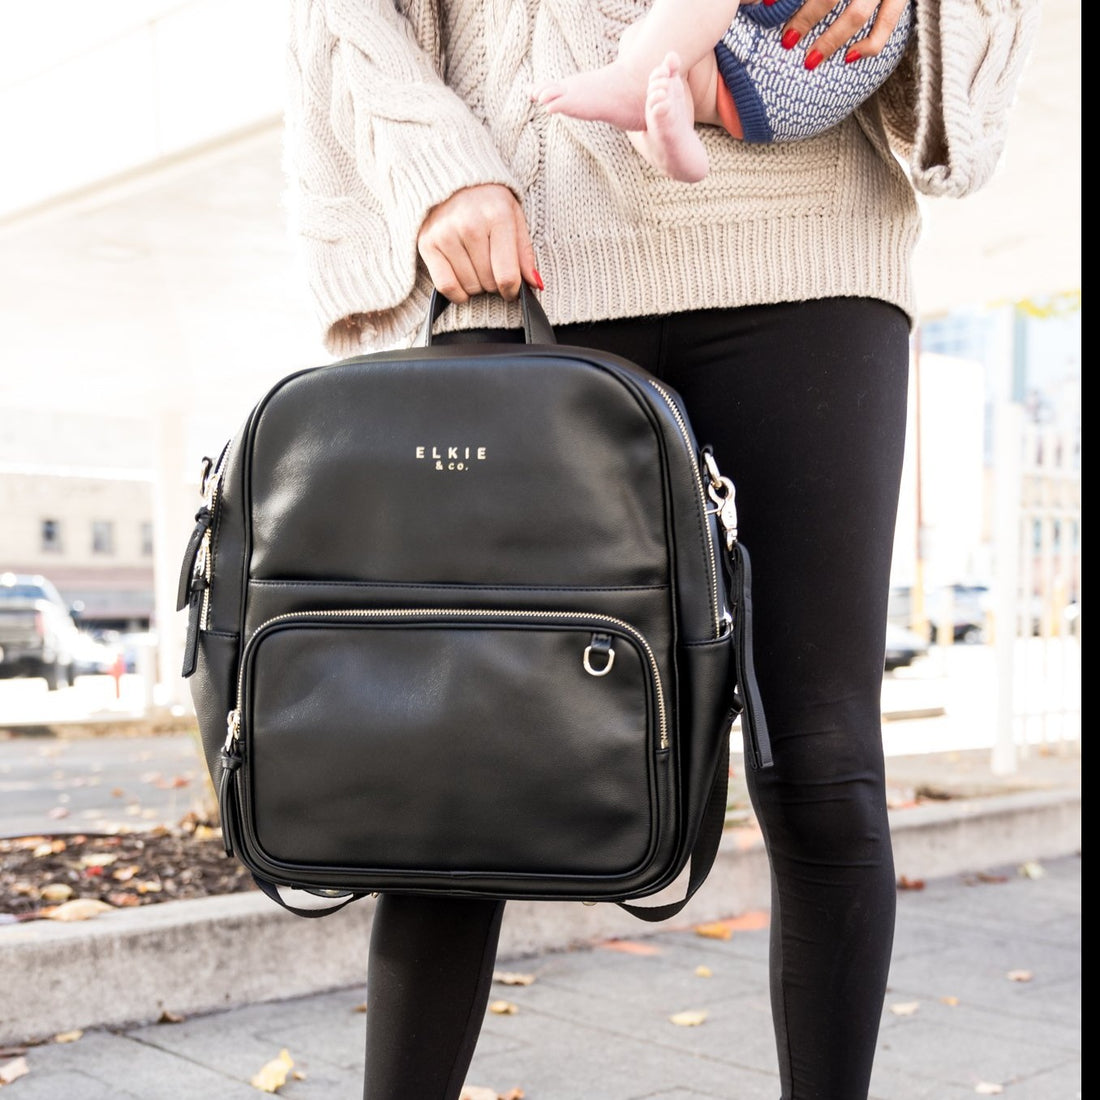 woman in the city holding a baby and also holding a black vegan leather backpack by  the  top grab handle